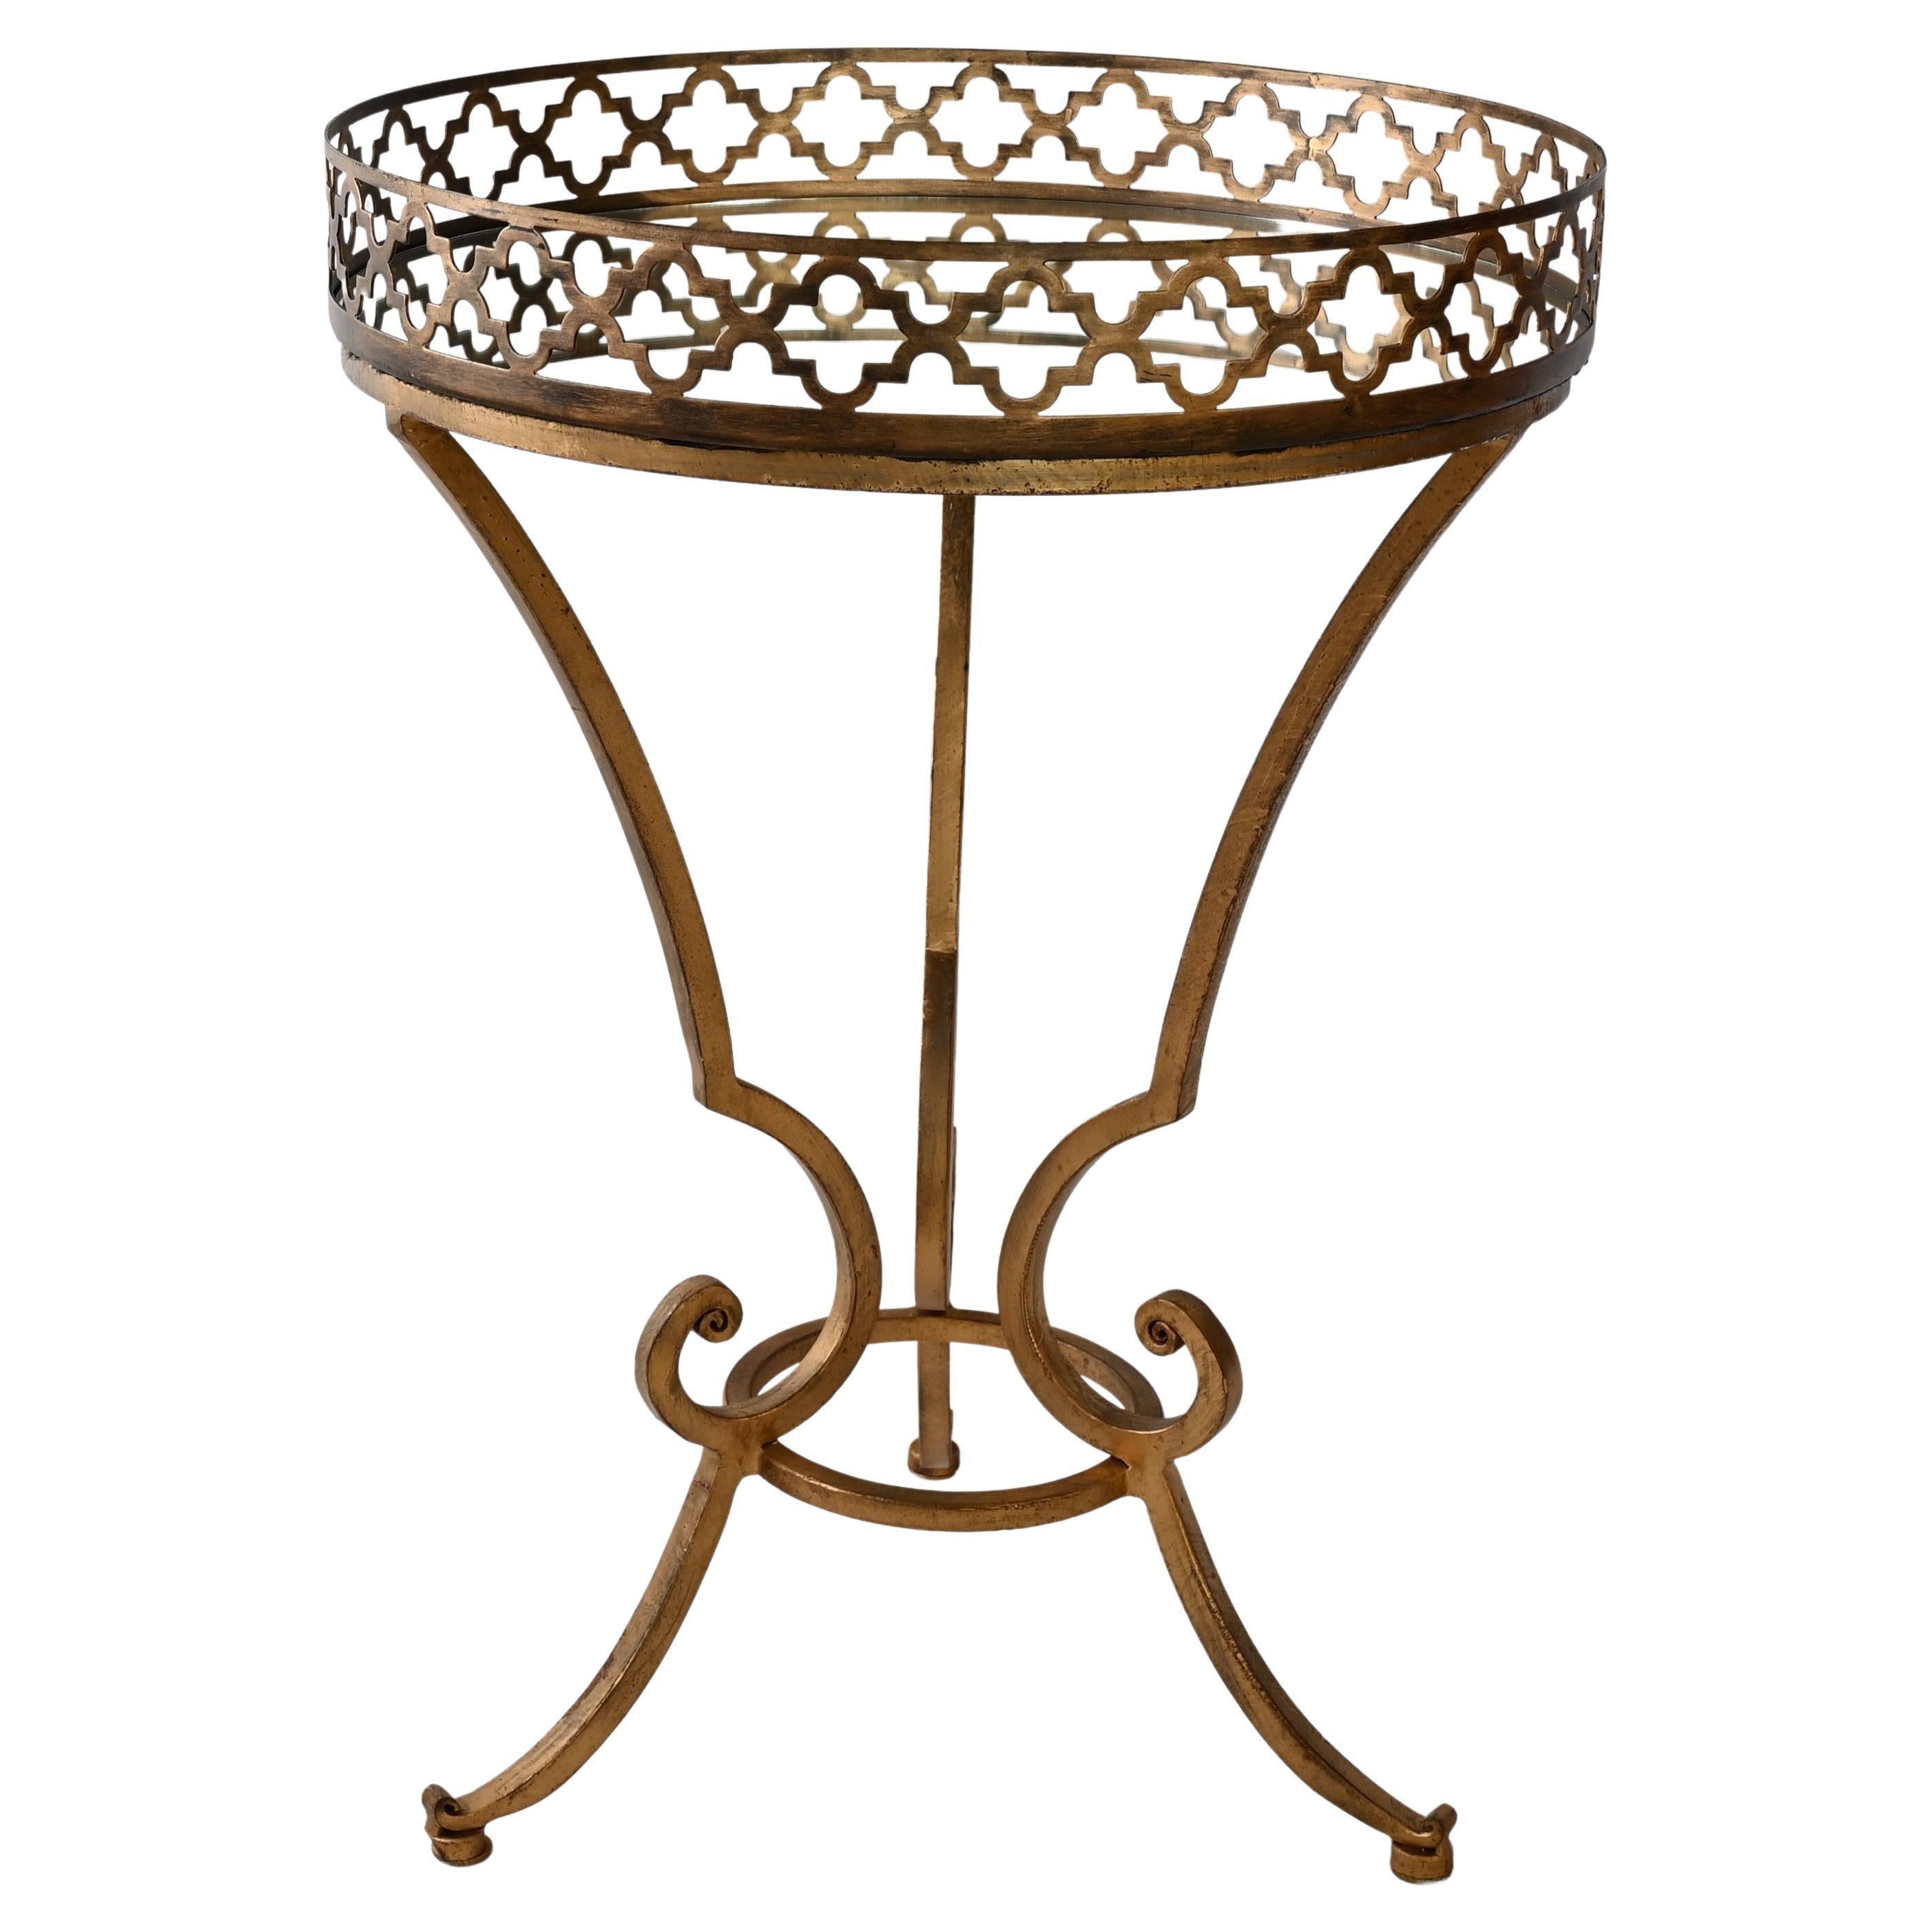 Hollywood Regency Style Side Table or End Table with Mirrored Top